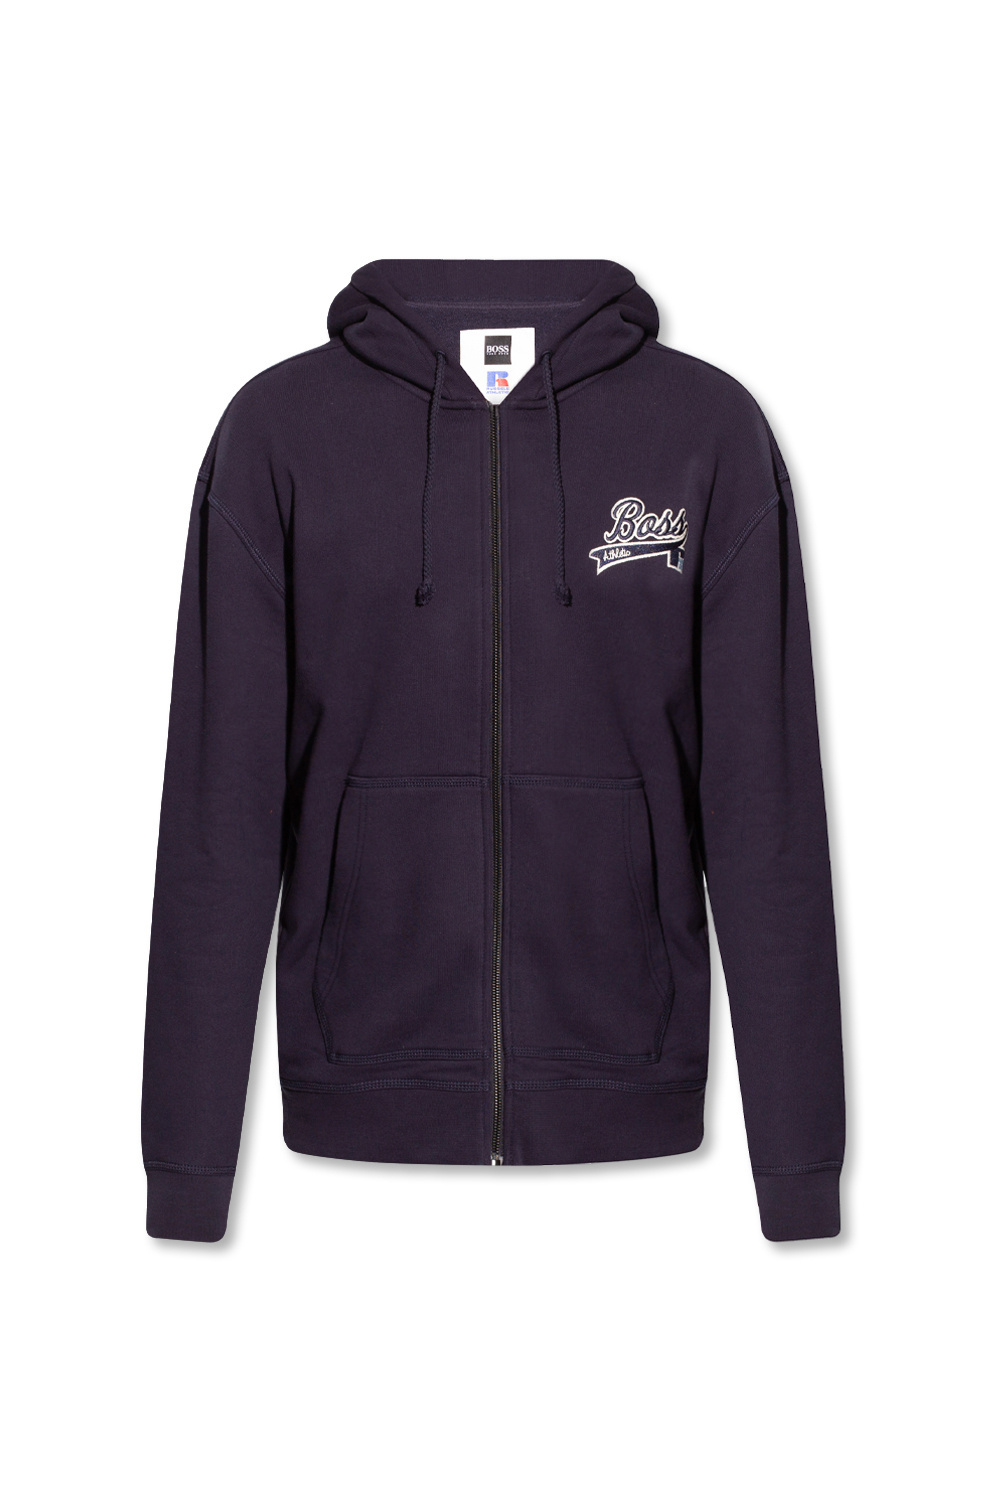 BOSS x Russell Athletic cotton-blend zip-up hoodie with exclusive logo